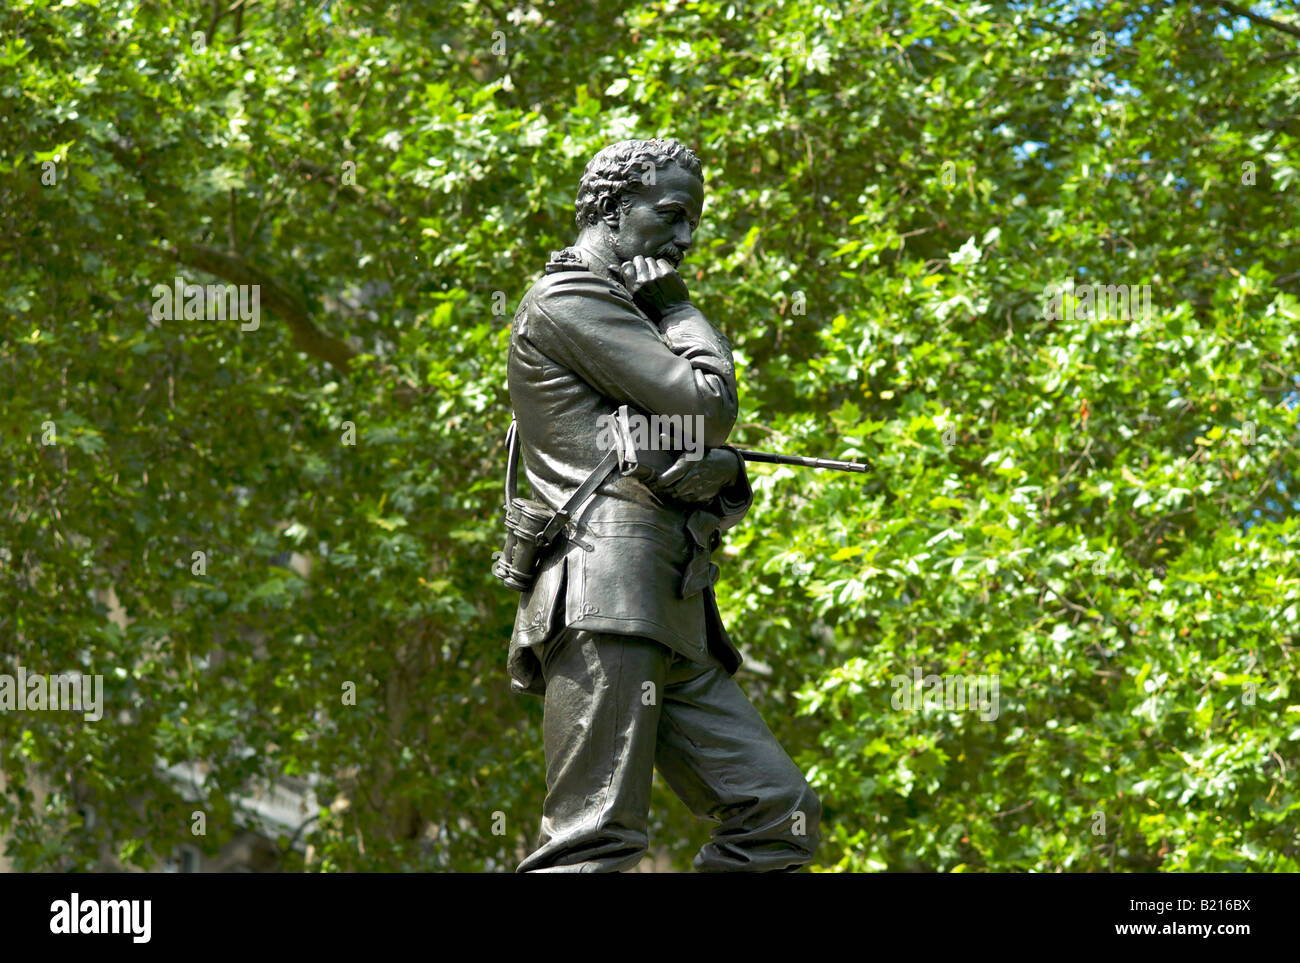 General Gordon Death High Resolution Stock Photography and Images - Alamy